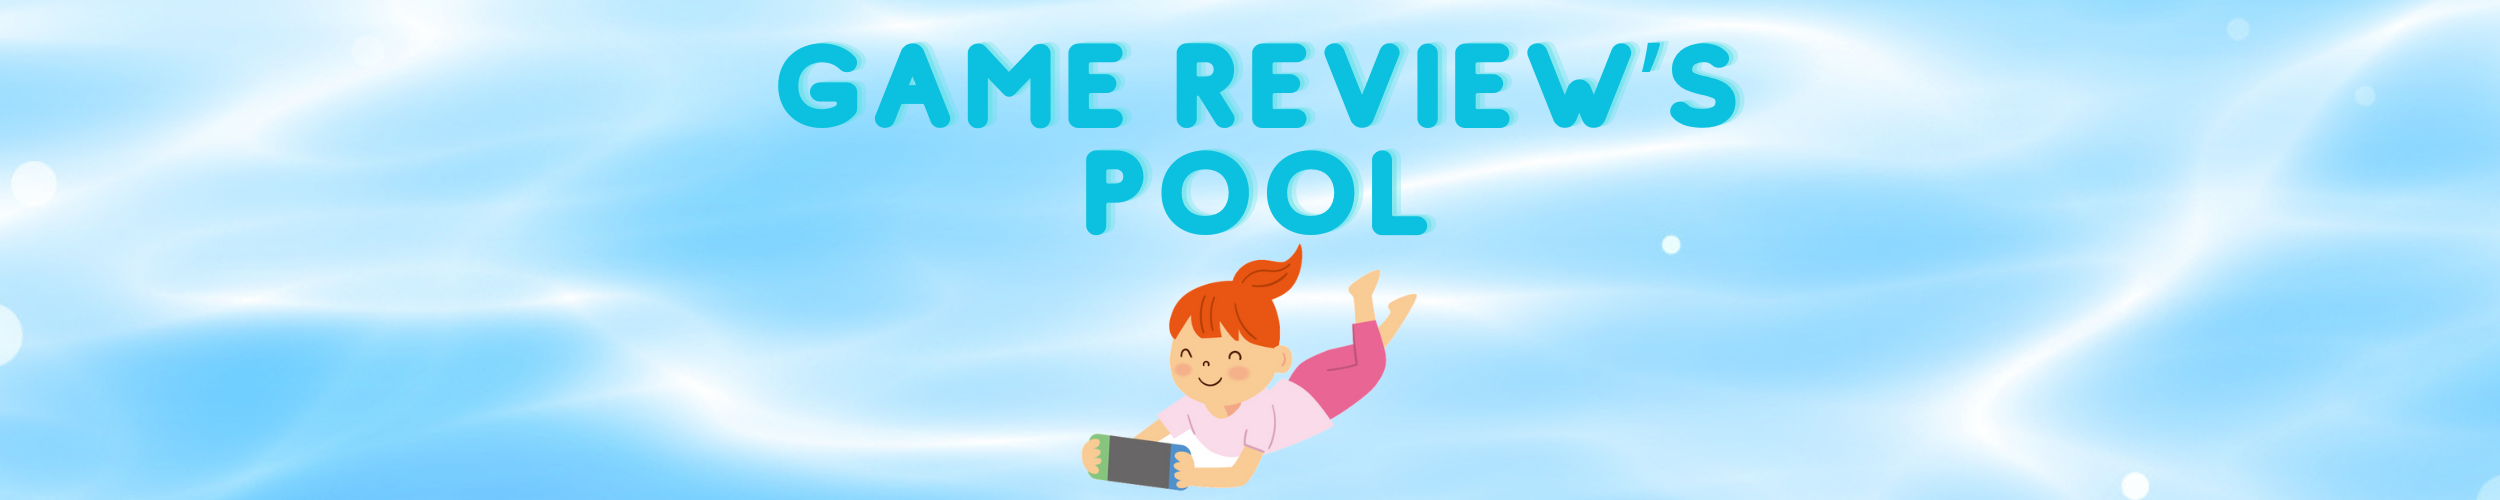 Game Review's pool